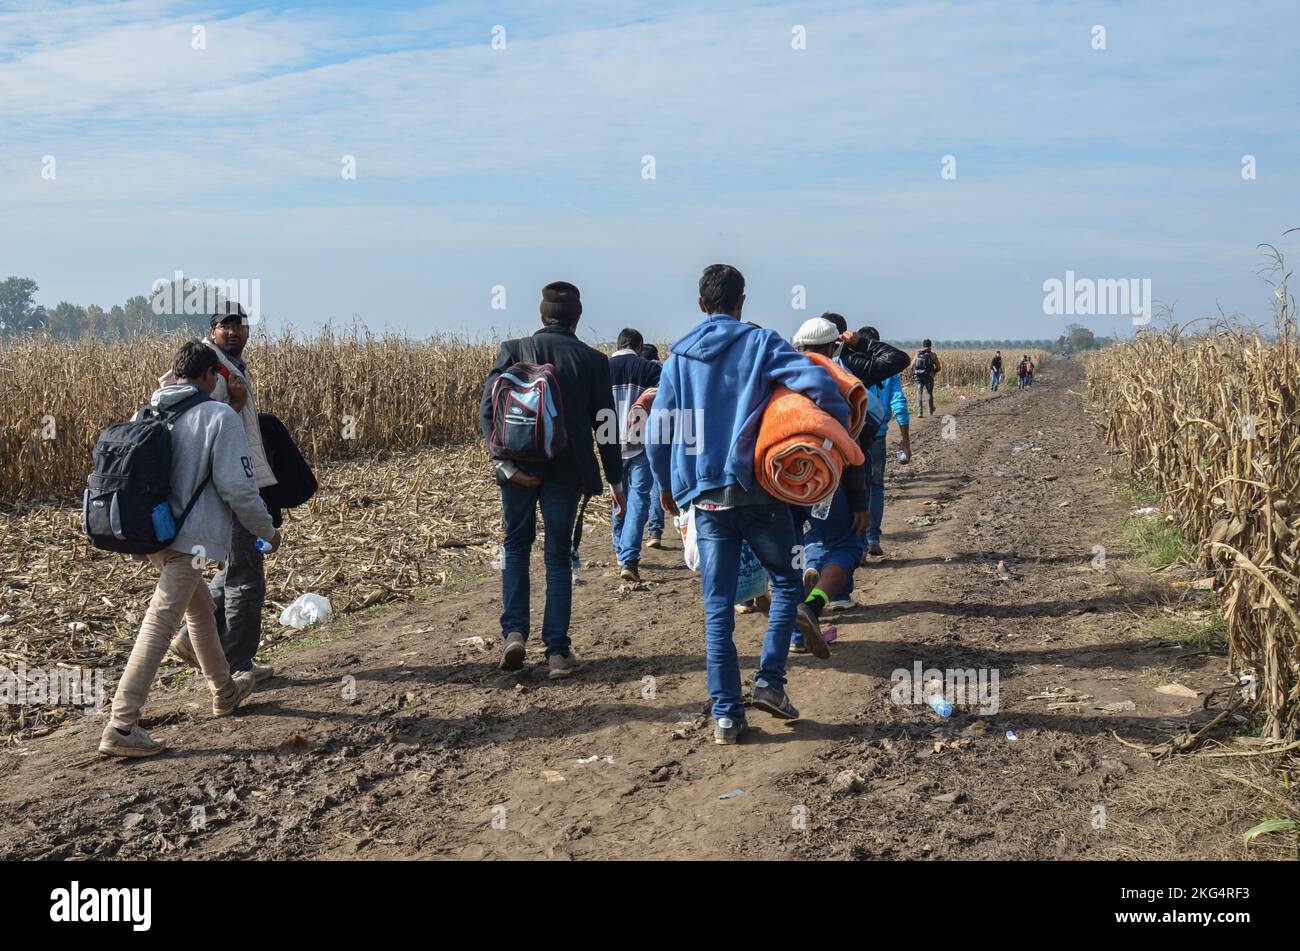 Refugees walking through the cornfield. Migrants trying to cross Croatian border to enter European Union (EU) in search for a better life. Stock Photo